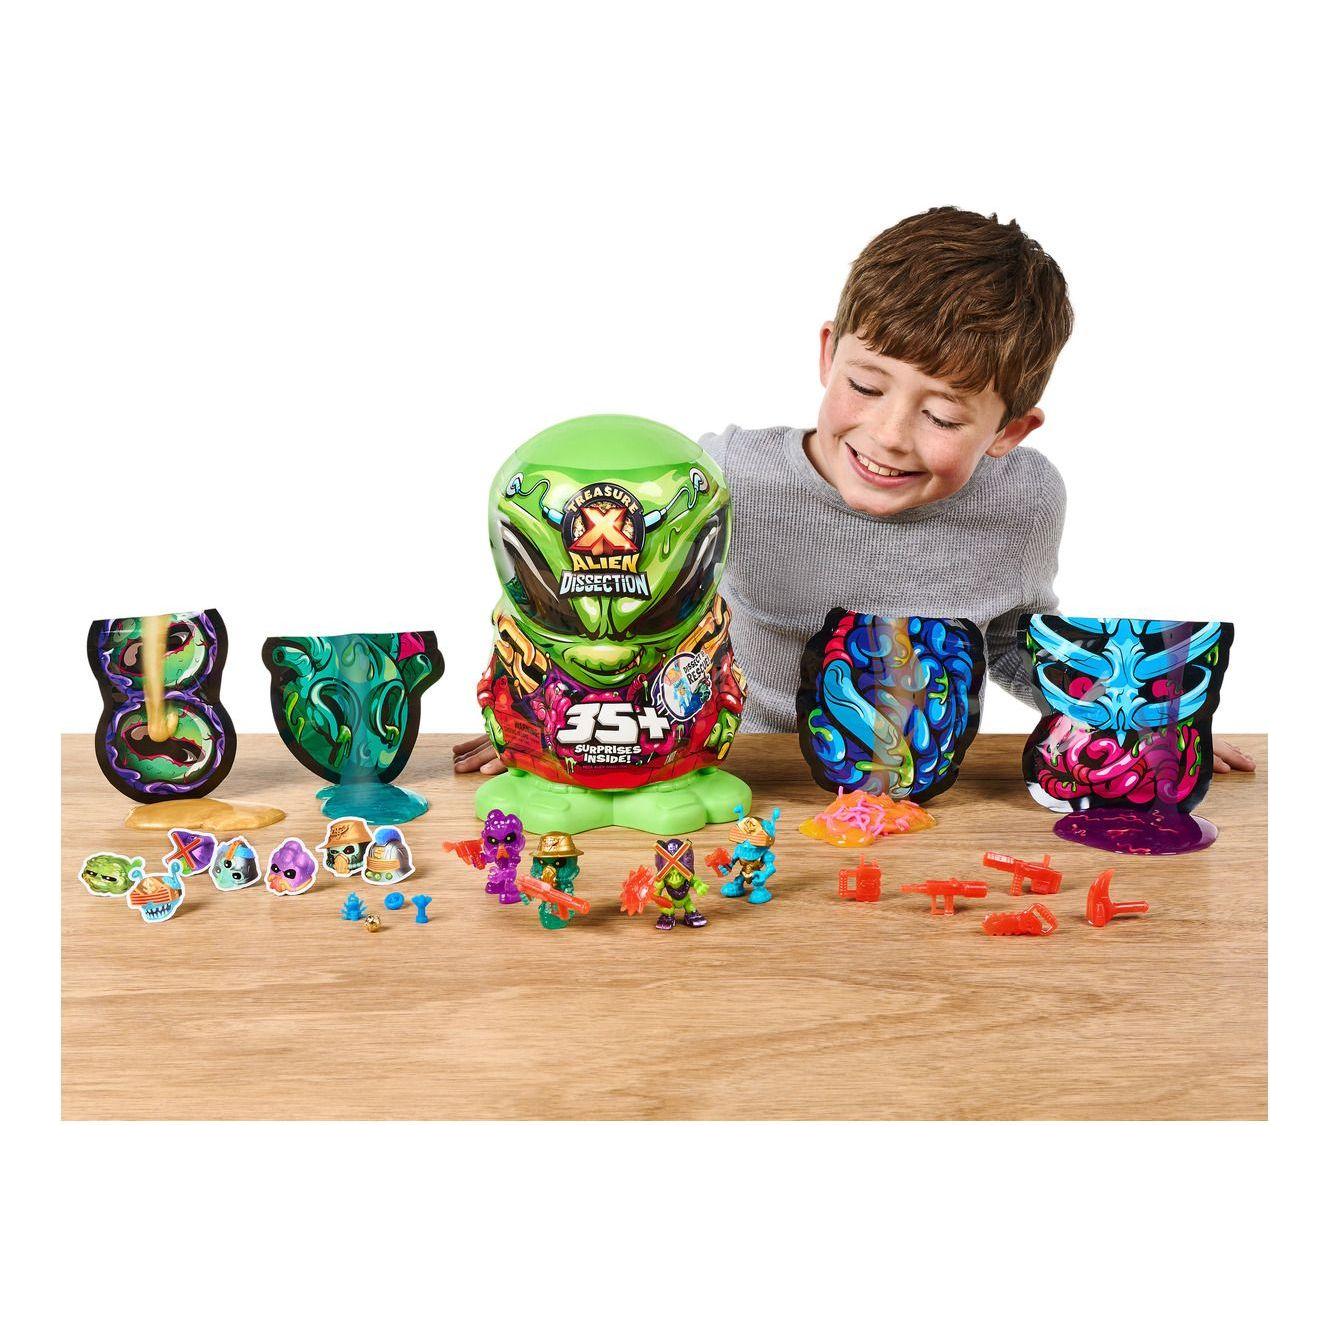  Treasure X Aliens - Dissection Kit with Slime, Action Figure,  and Treasure : Toys & Games